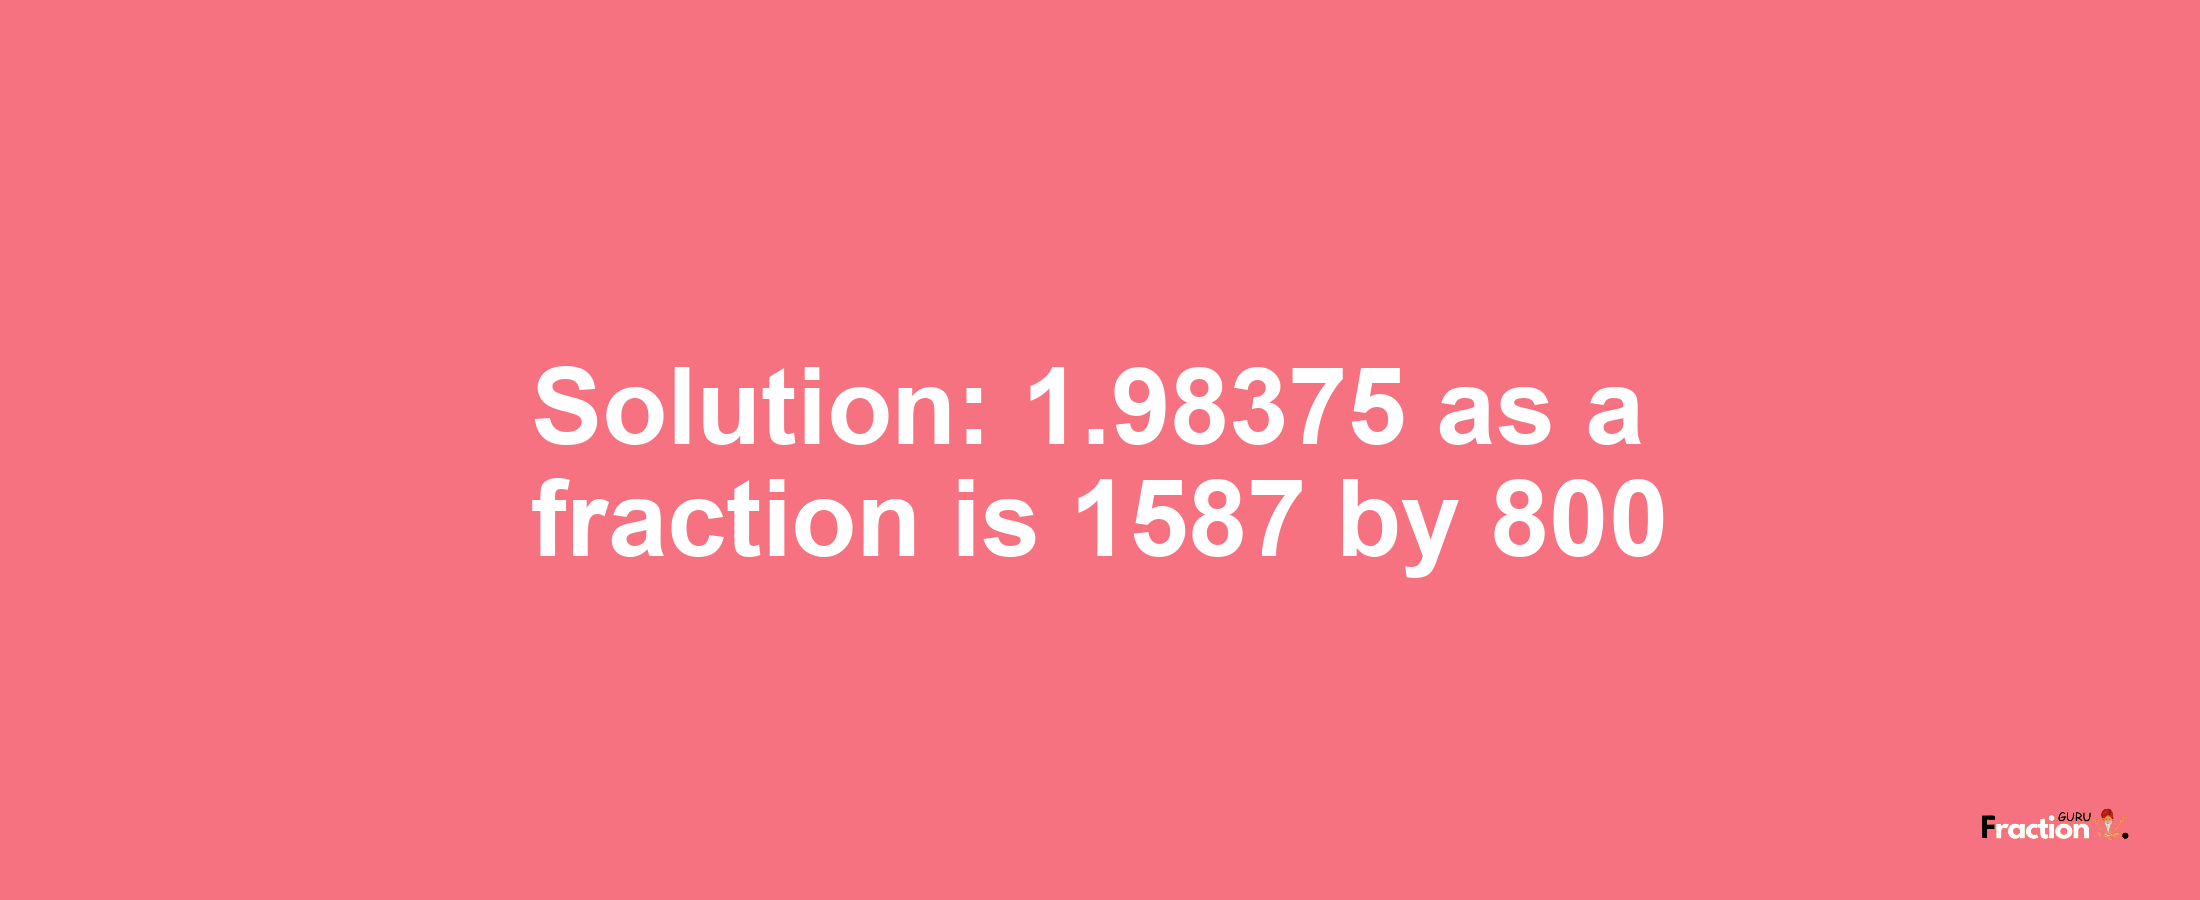 Solution:1.98375 as a fraction is 1587/800